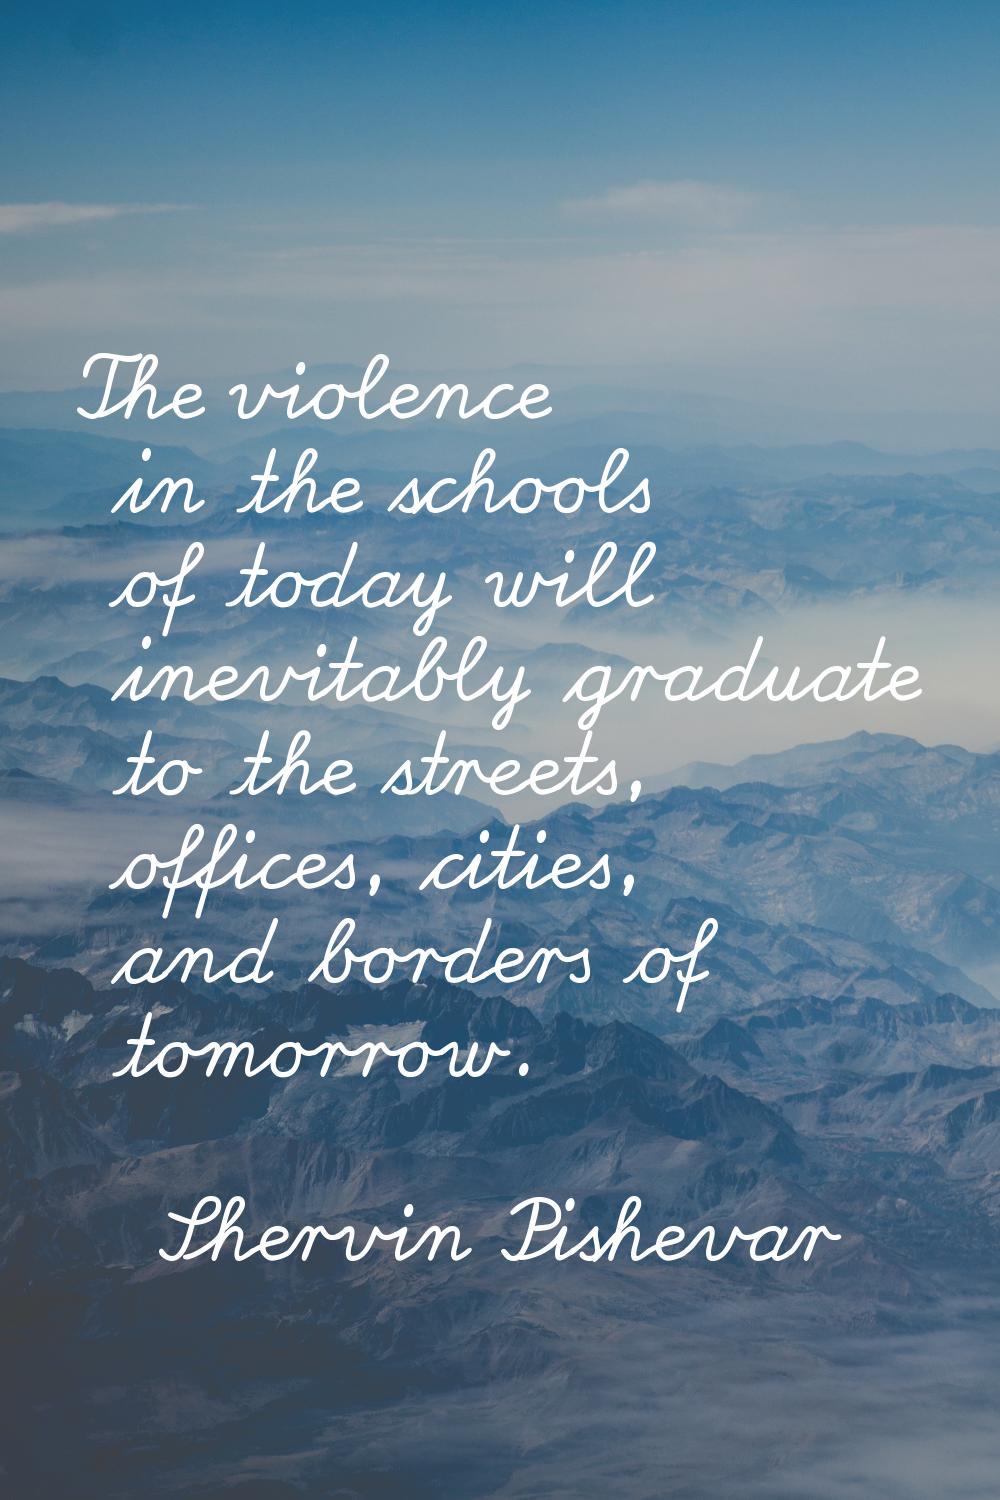 The violence in the schools of today will inevitably graduate to the streets, offices, cities, and 